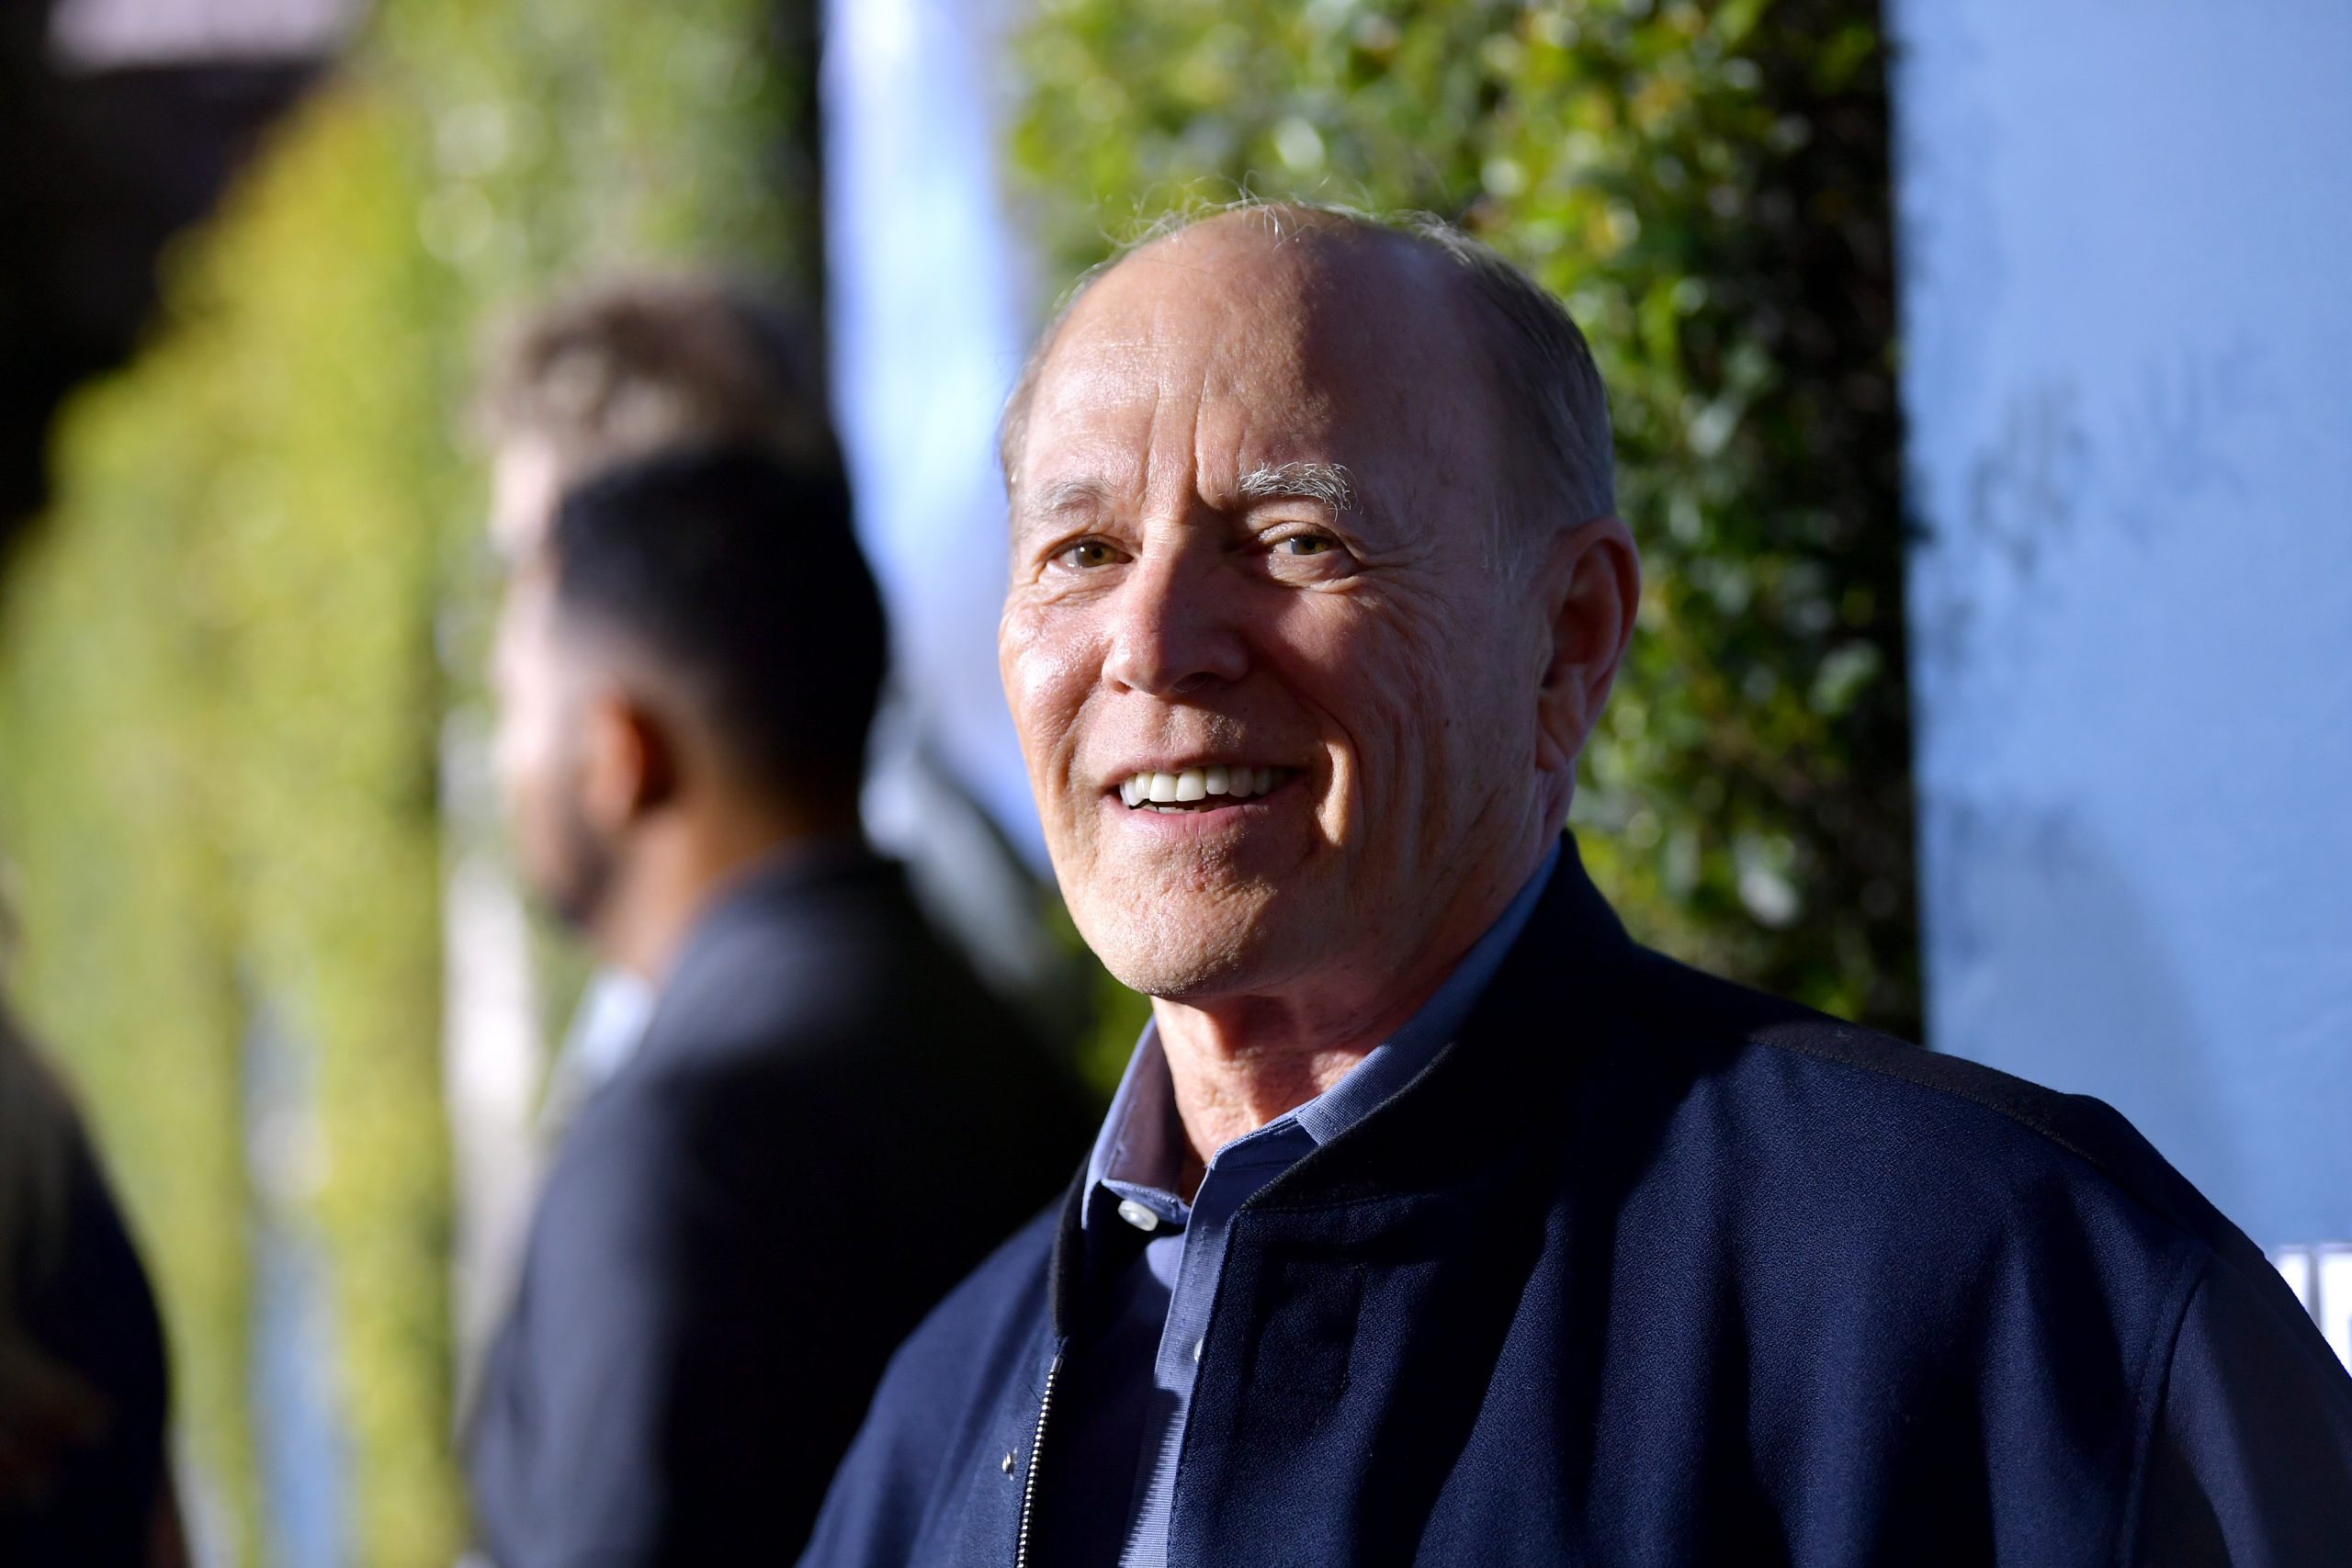 UNIVERSAL CITY, CALIFORNIA - JULY 22: Producer Frank Marshall attends the grand opening celebration of 'Jurassic World -The Ride' at Universal Studios Hollywood on July 22, 2019 in Universal City, California. (Photo by Emma McIntyre/Getty Images for Universal Studios Hollywood )